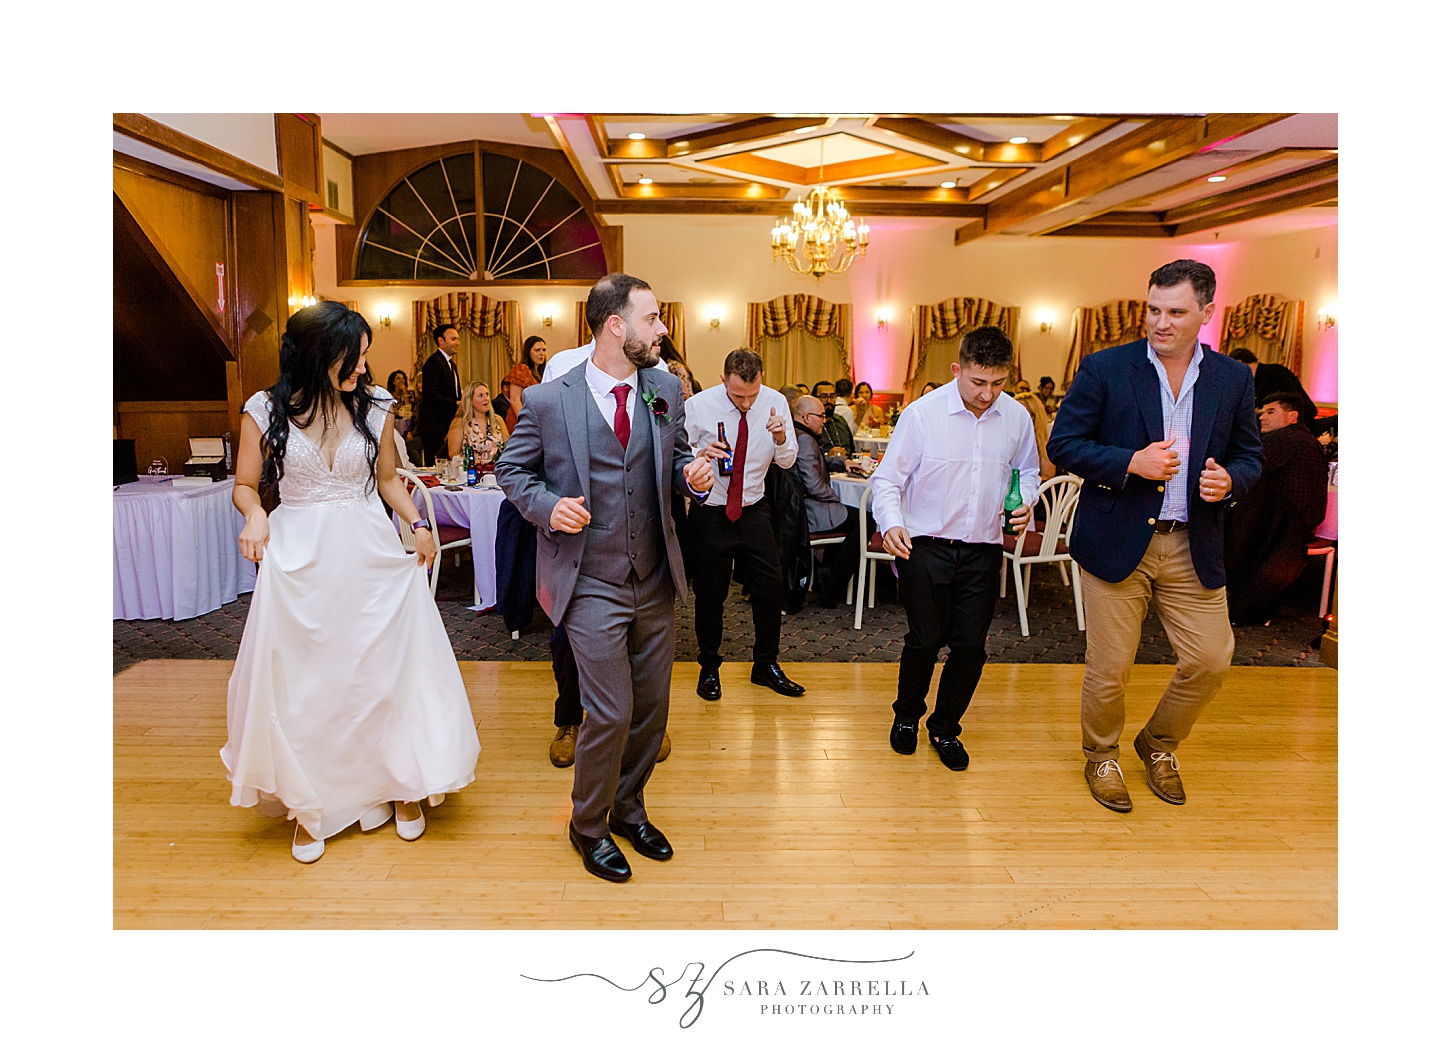 newlyweds dance with guests during wedding reception at Jacky's Galaxie